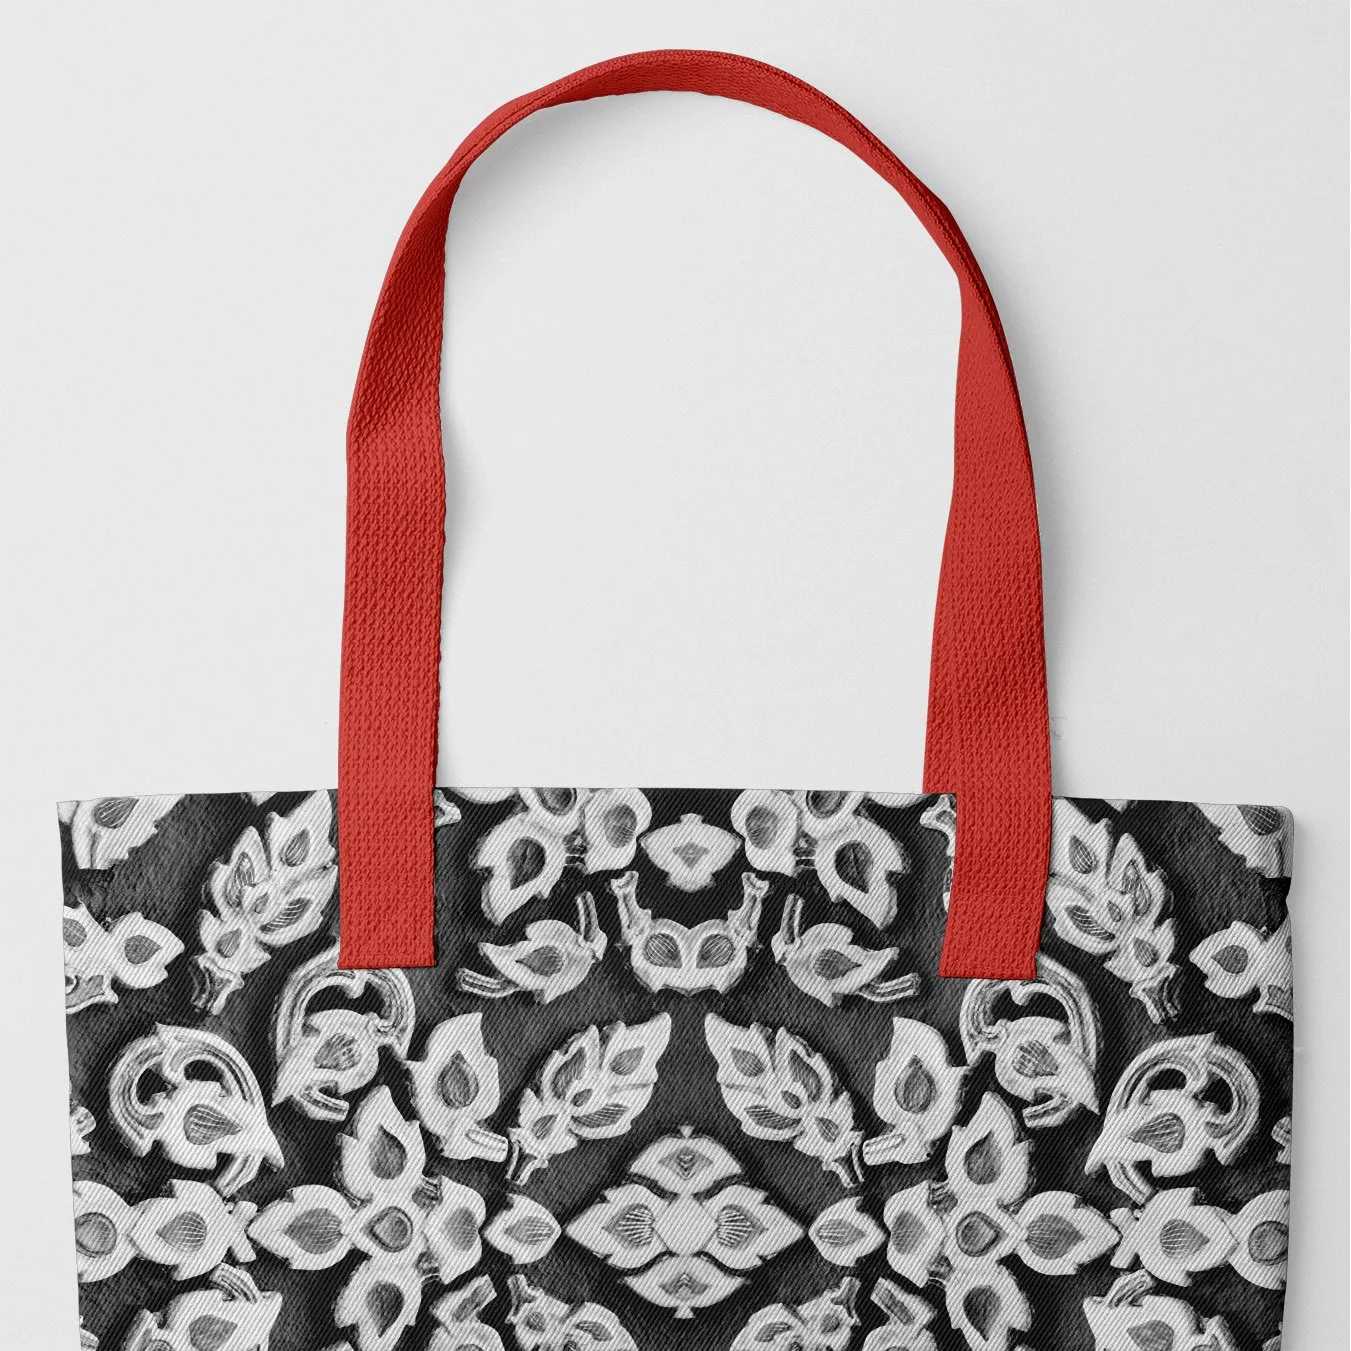 Entering Ayodhya Tote - Black And White - Heavy Duty Reusable Grocery Bag - Red Handles - Shopping Totes - Aesthetic Art